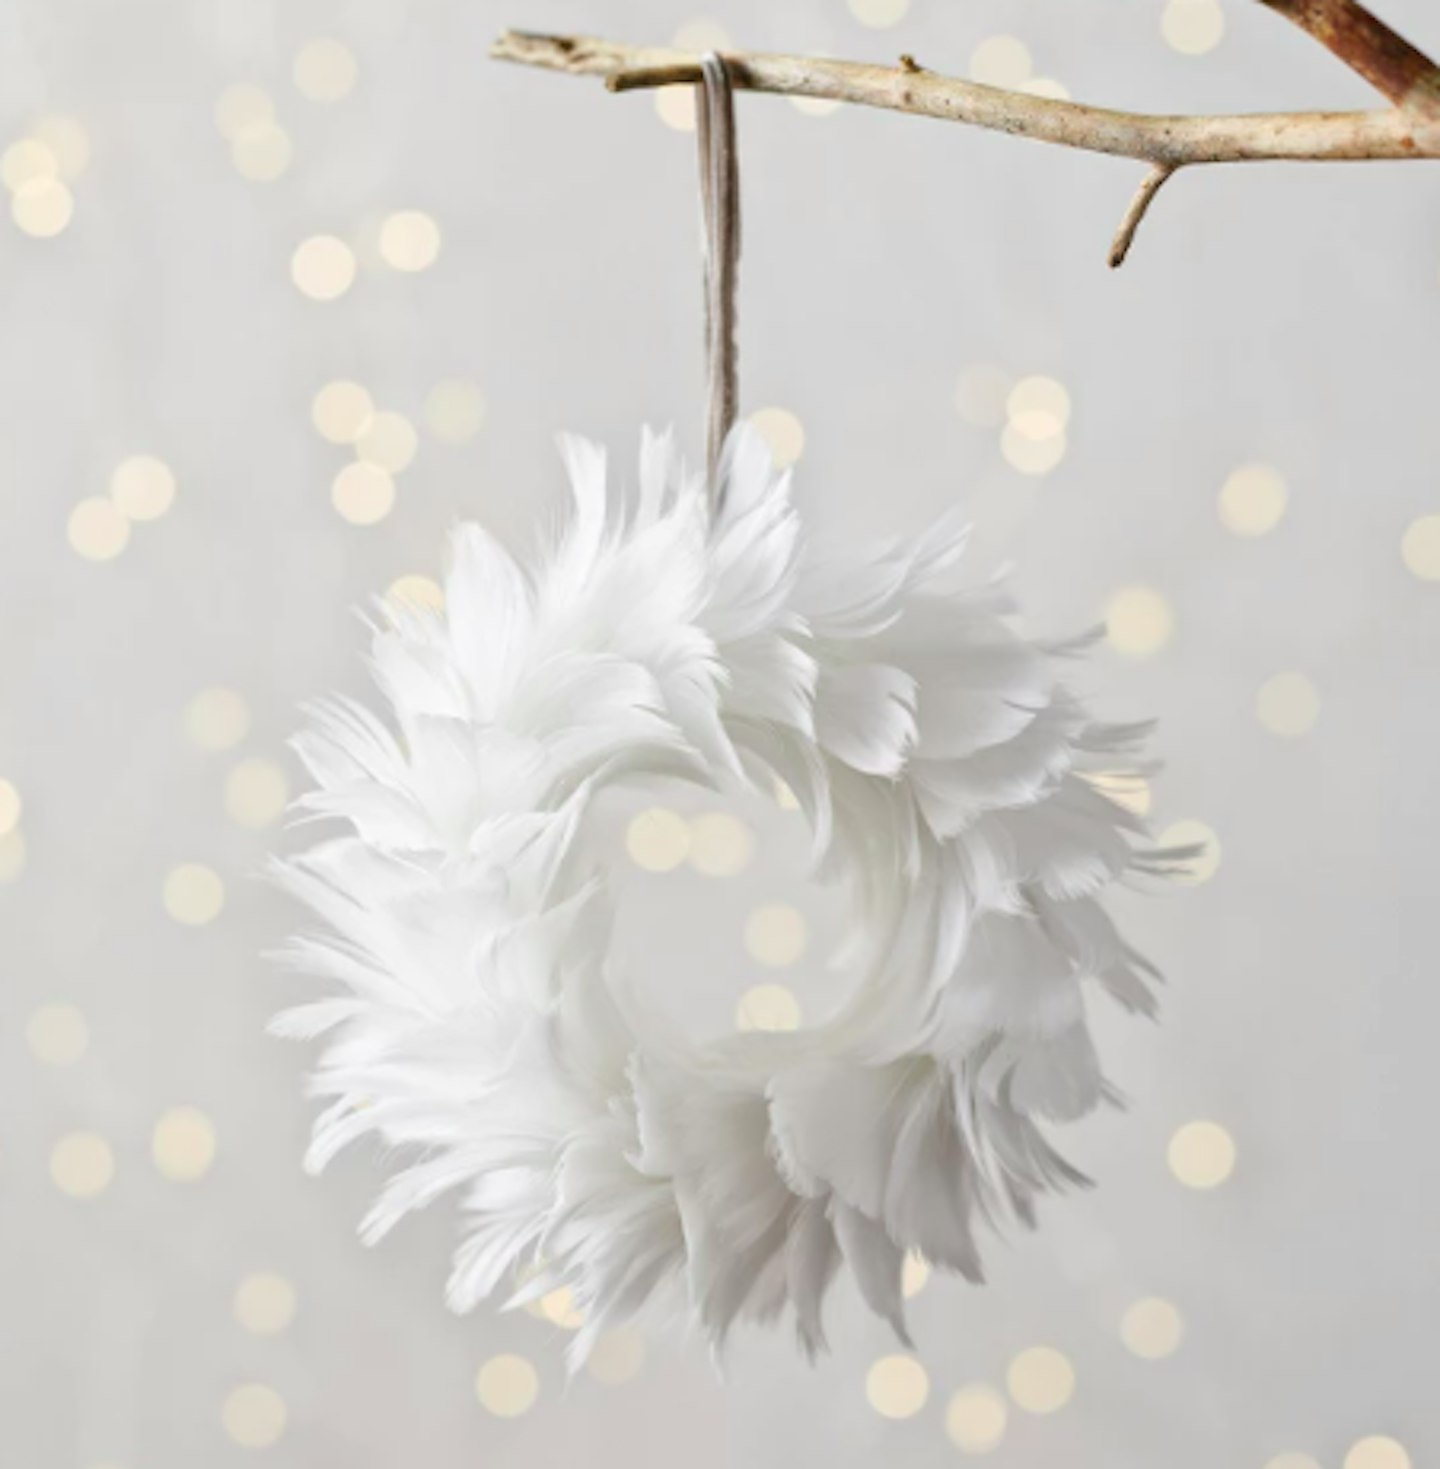 Christmas 2020: Christmas Tree Decorations Trends - Snowy White